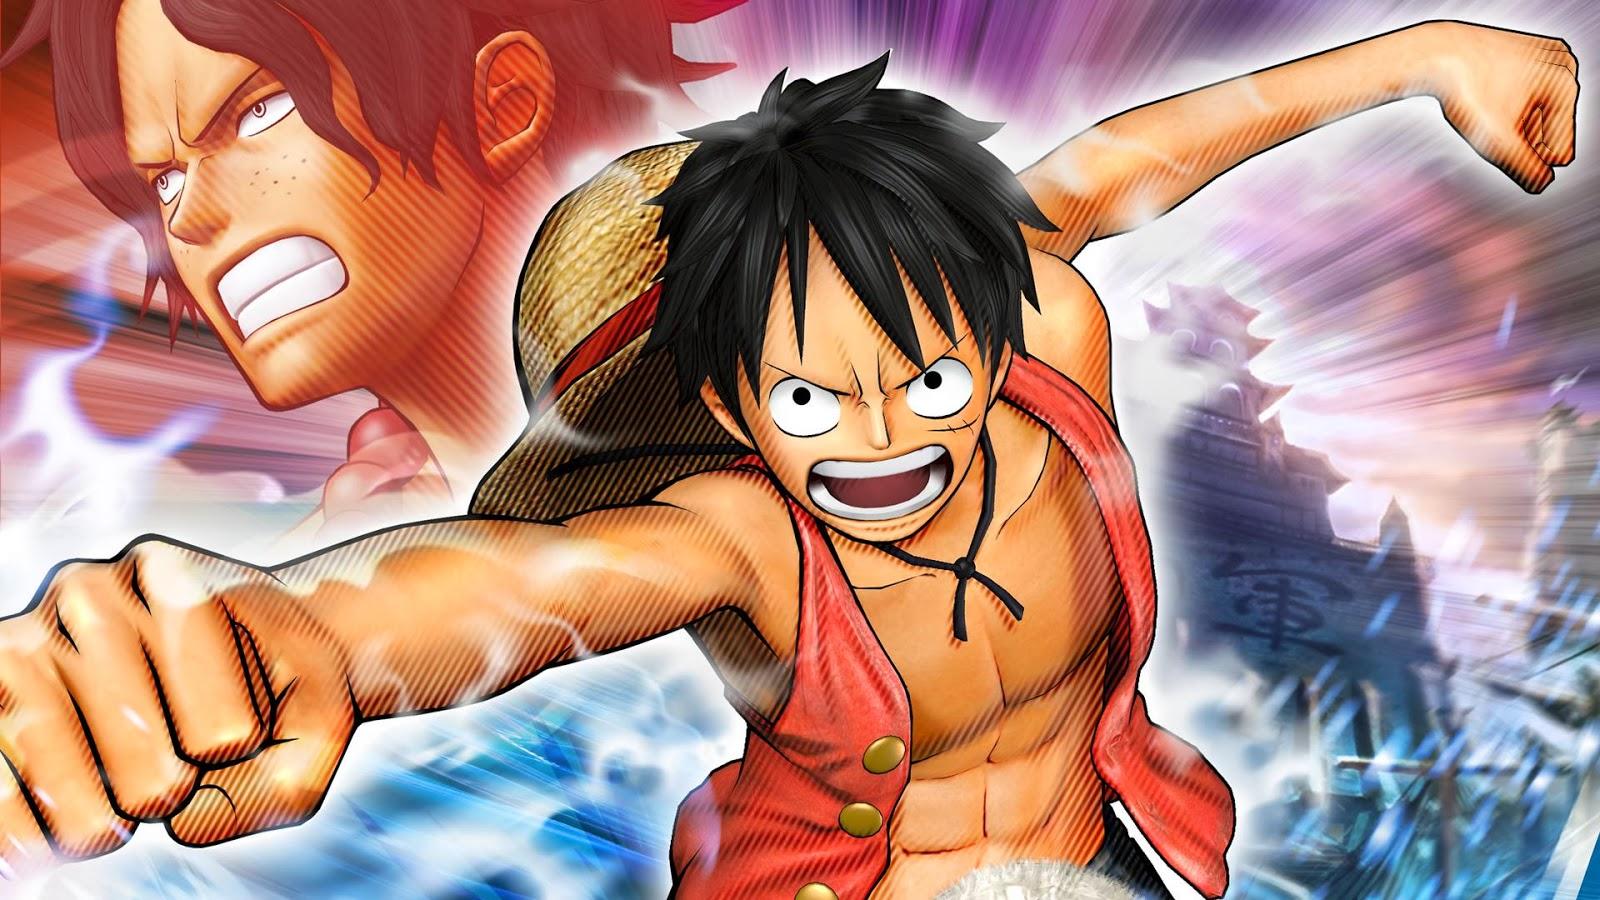 Video Game Review- One Piece: Pirate Warriors